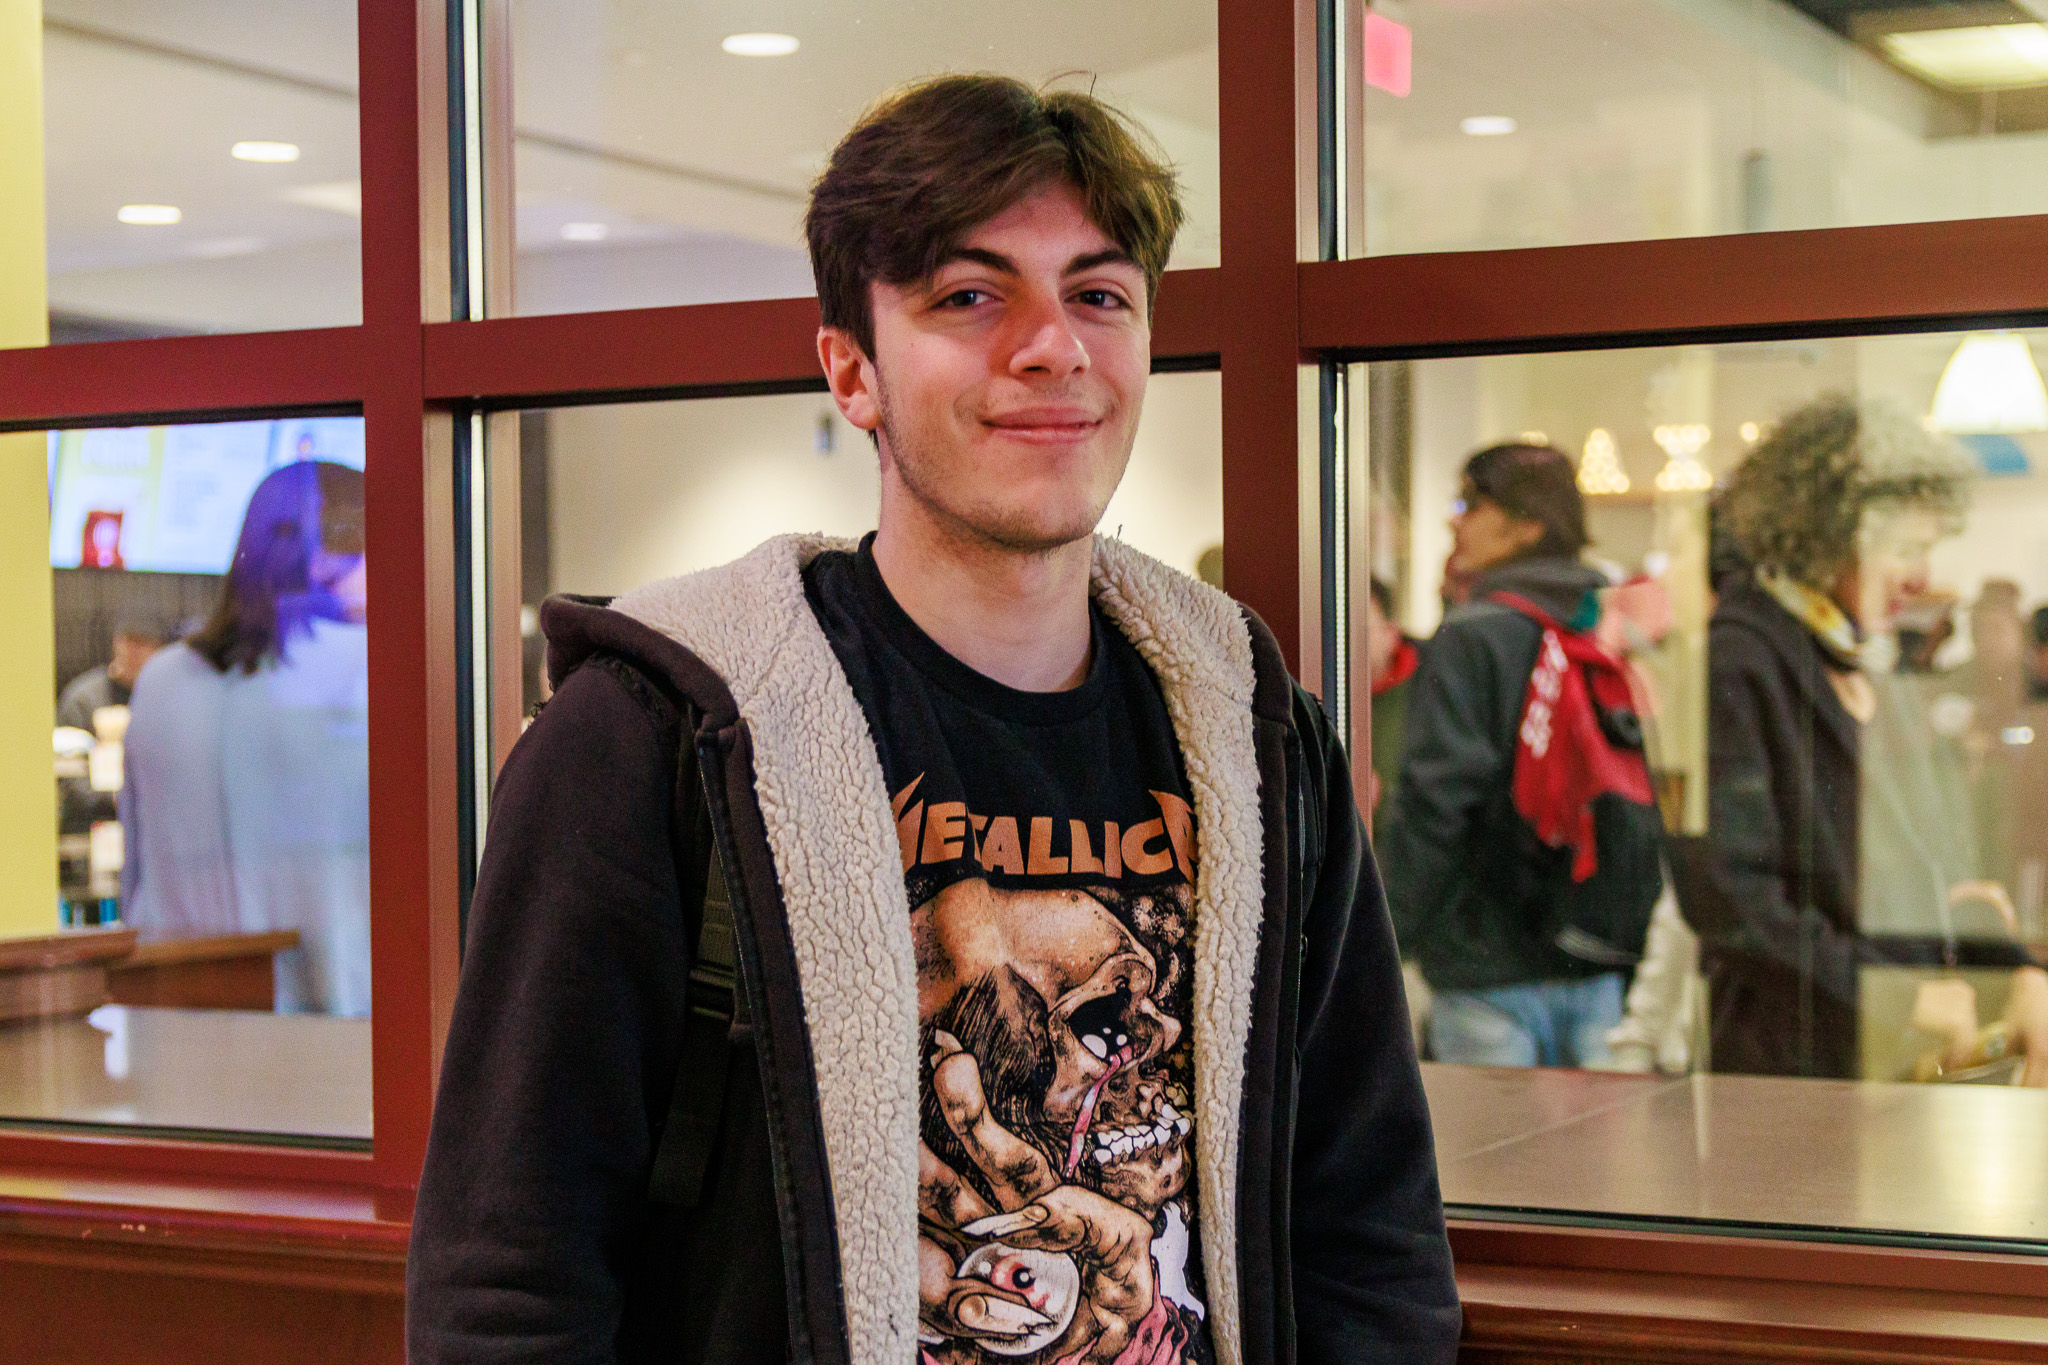 Chris Alberico, a freshman journalism and digital media major, is happy that there is another location to get coffee on campus.
Sal DiMaggio | The Montclarion